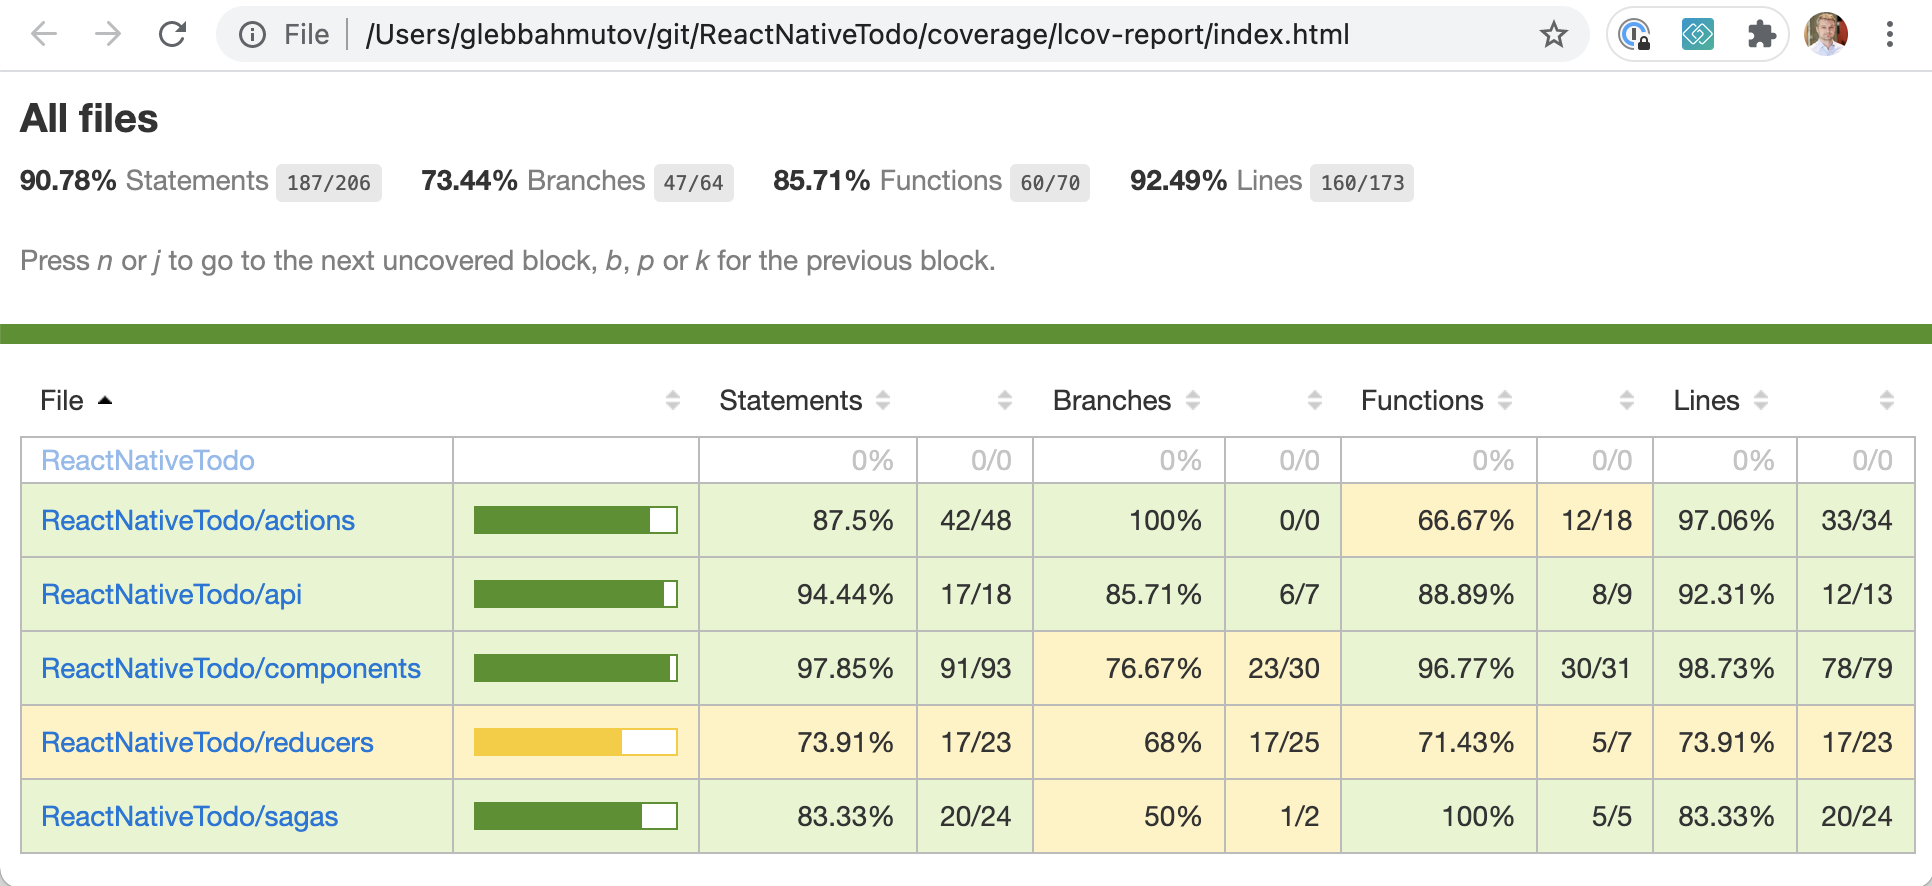 The code coverage summary